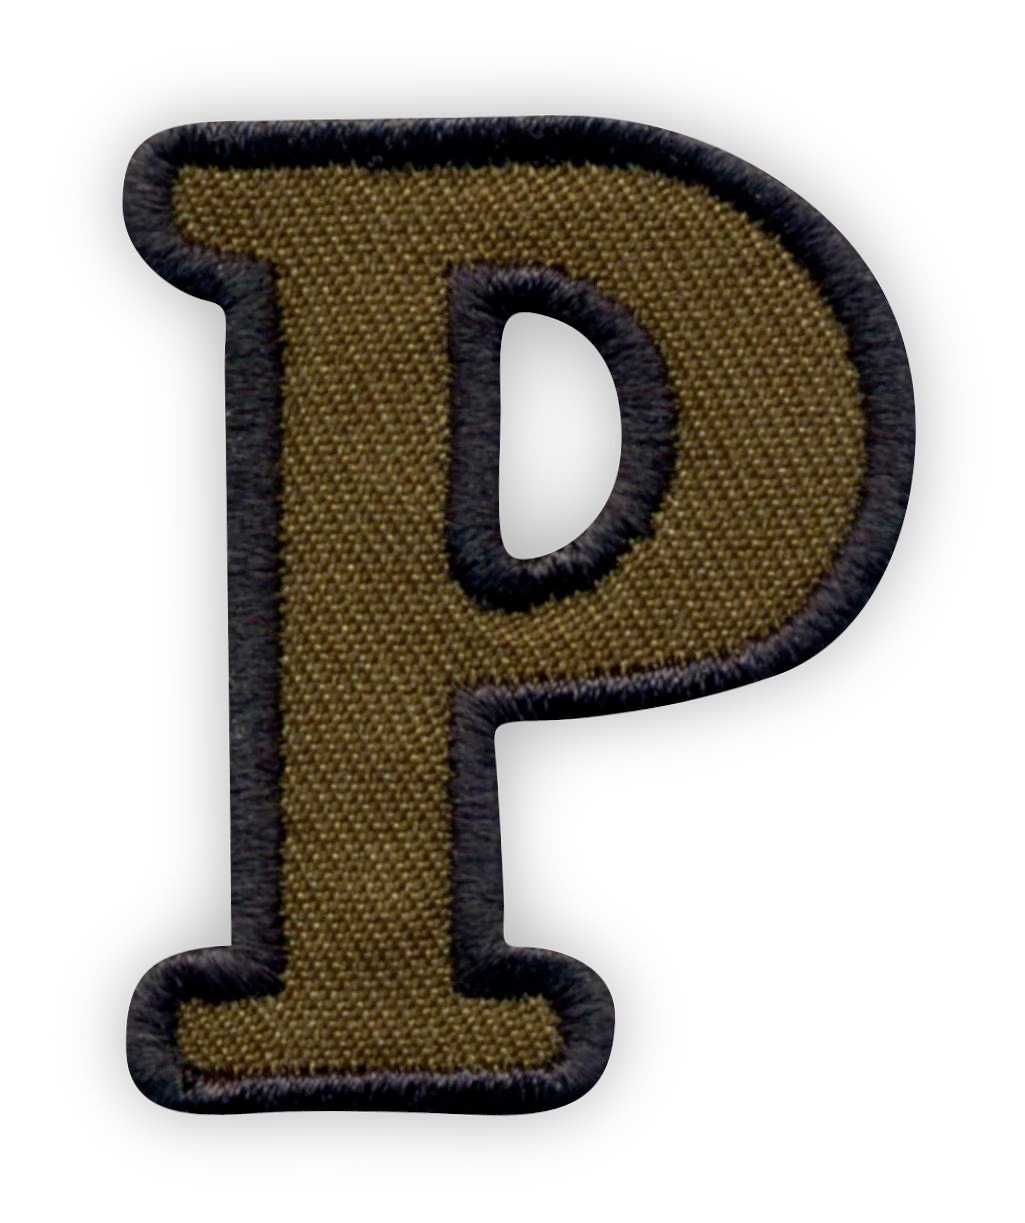 P Letter Design In Black And Brown